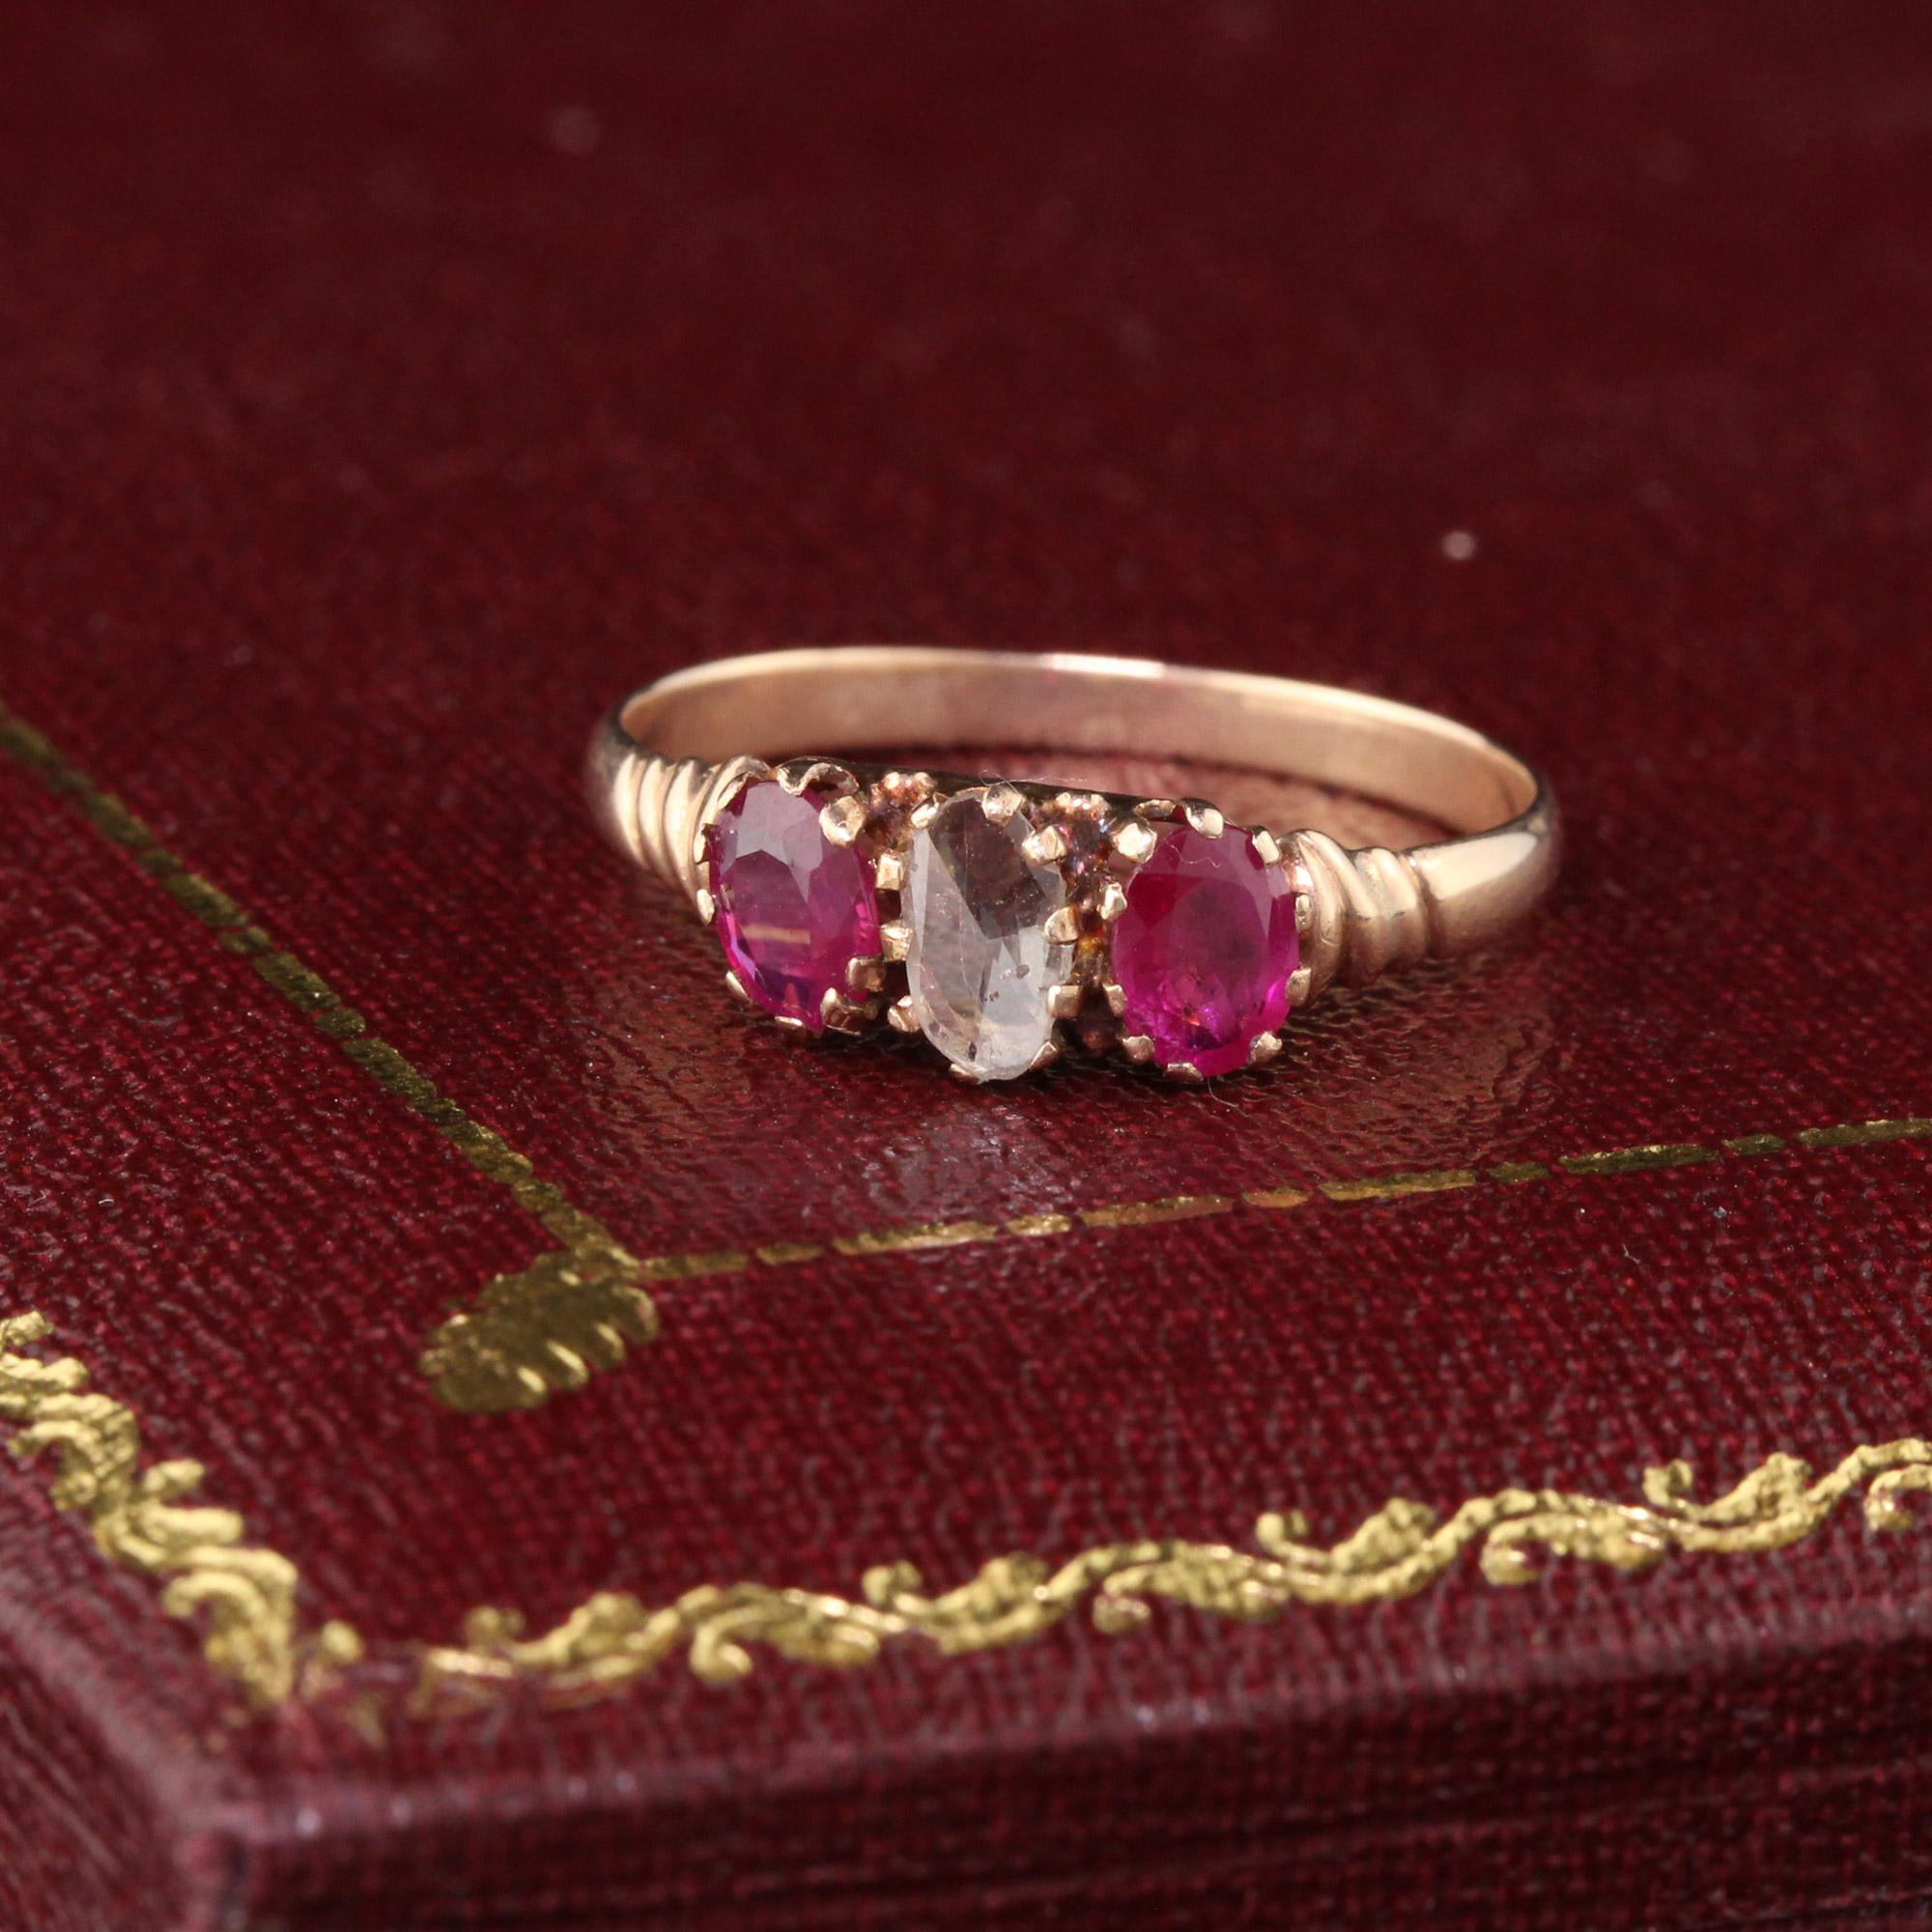 Victorian 3-Stone Engagement Ring with a rose cut oval diamond in the center and oval rubies on either side!

#R0331

Metal: 10K Rose Gold 

Weight: 1.4 Grams

Diamond Weight: Approximately 0.20 cts

Diamond Color: J

Diamond Clarity: SI2

Ring